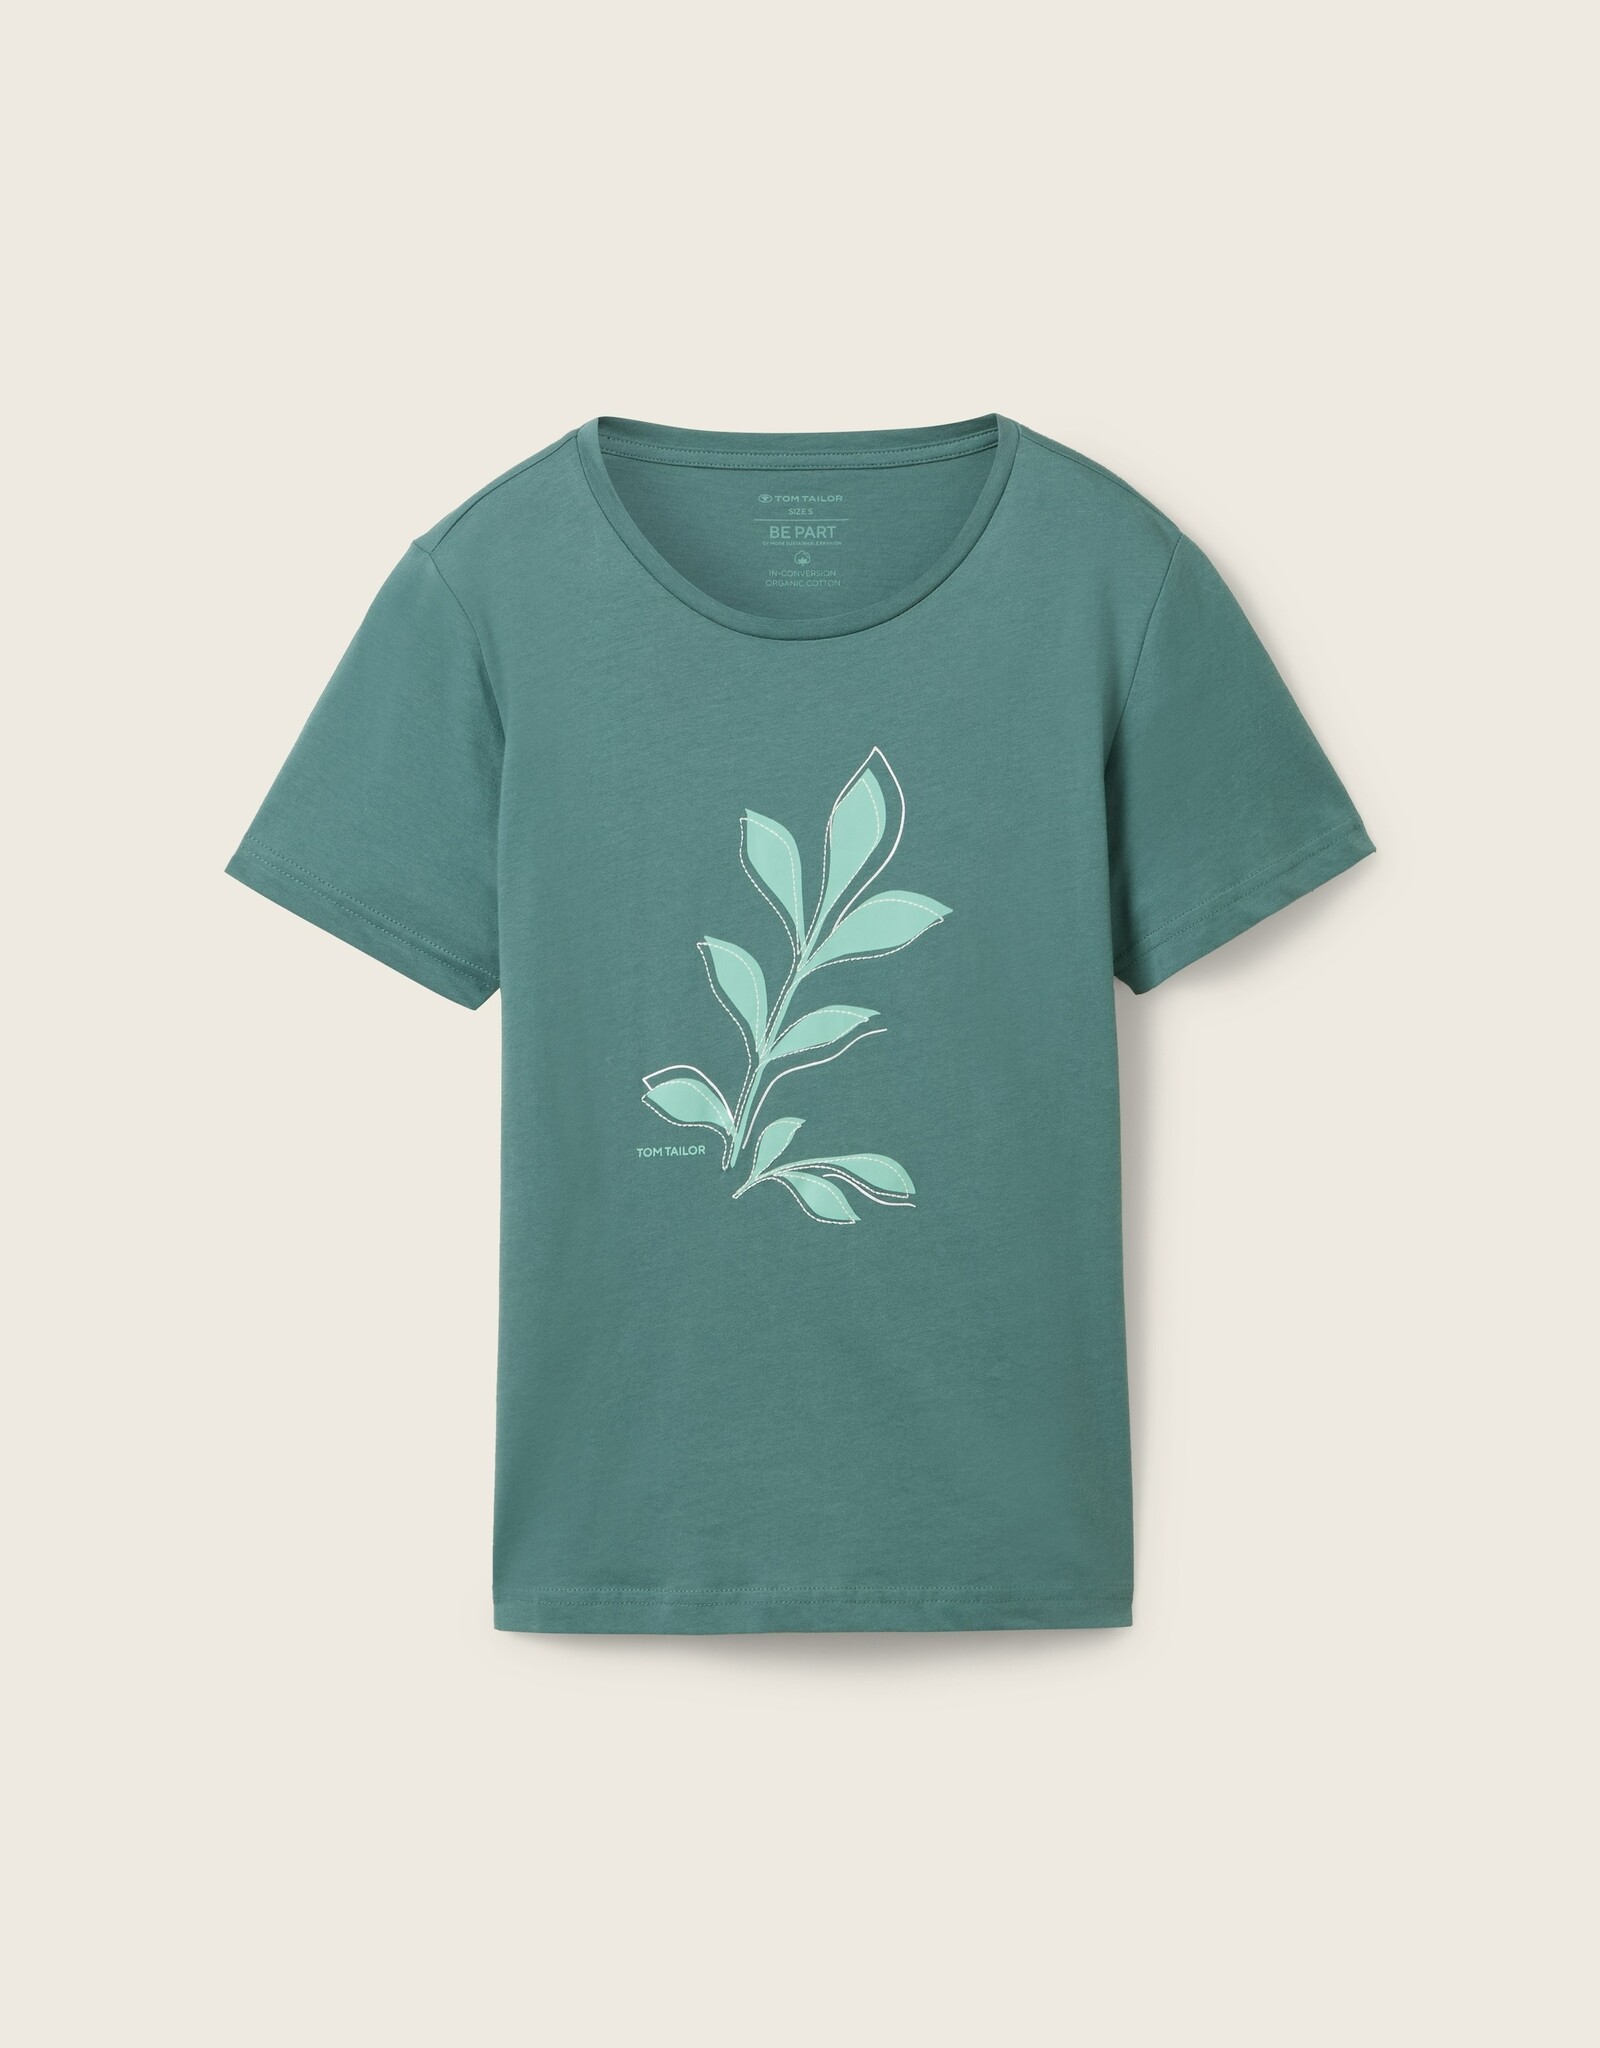 Tom Tailor T-Shirt with Leaf Print